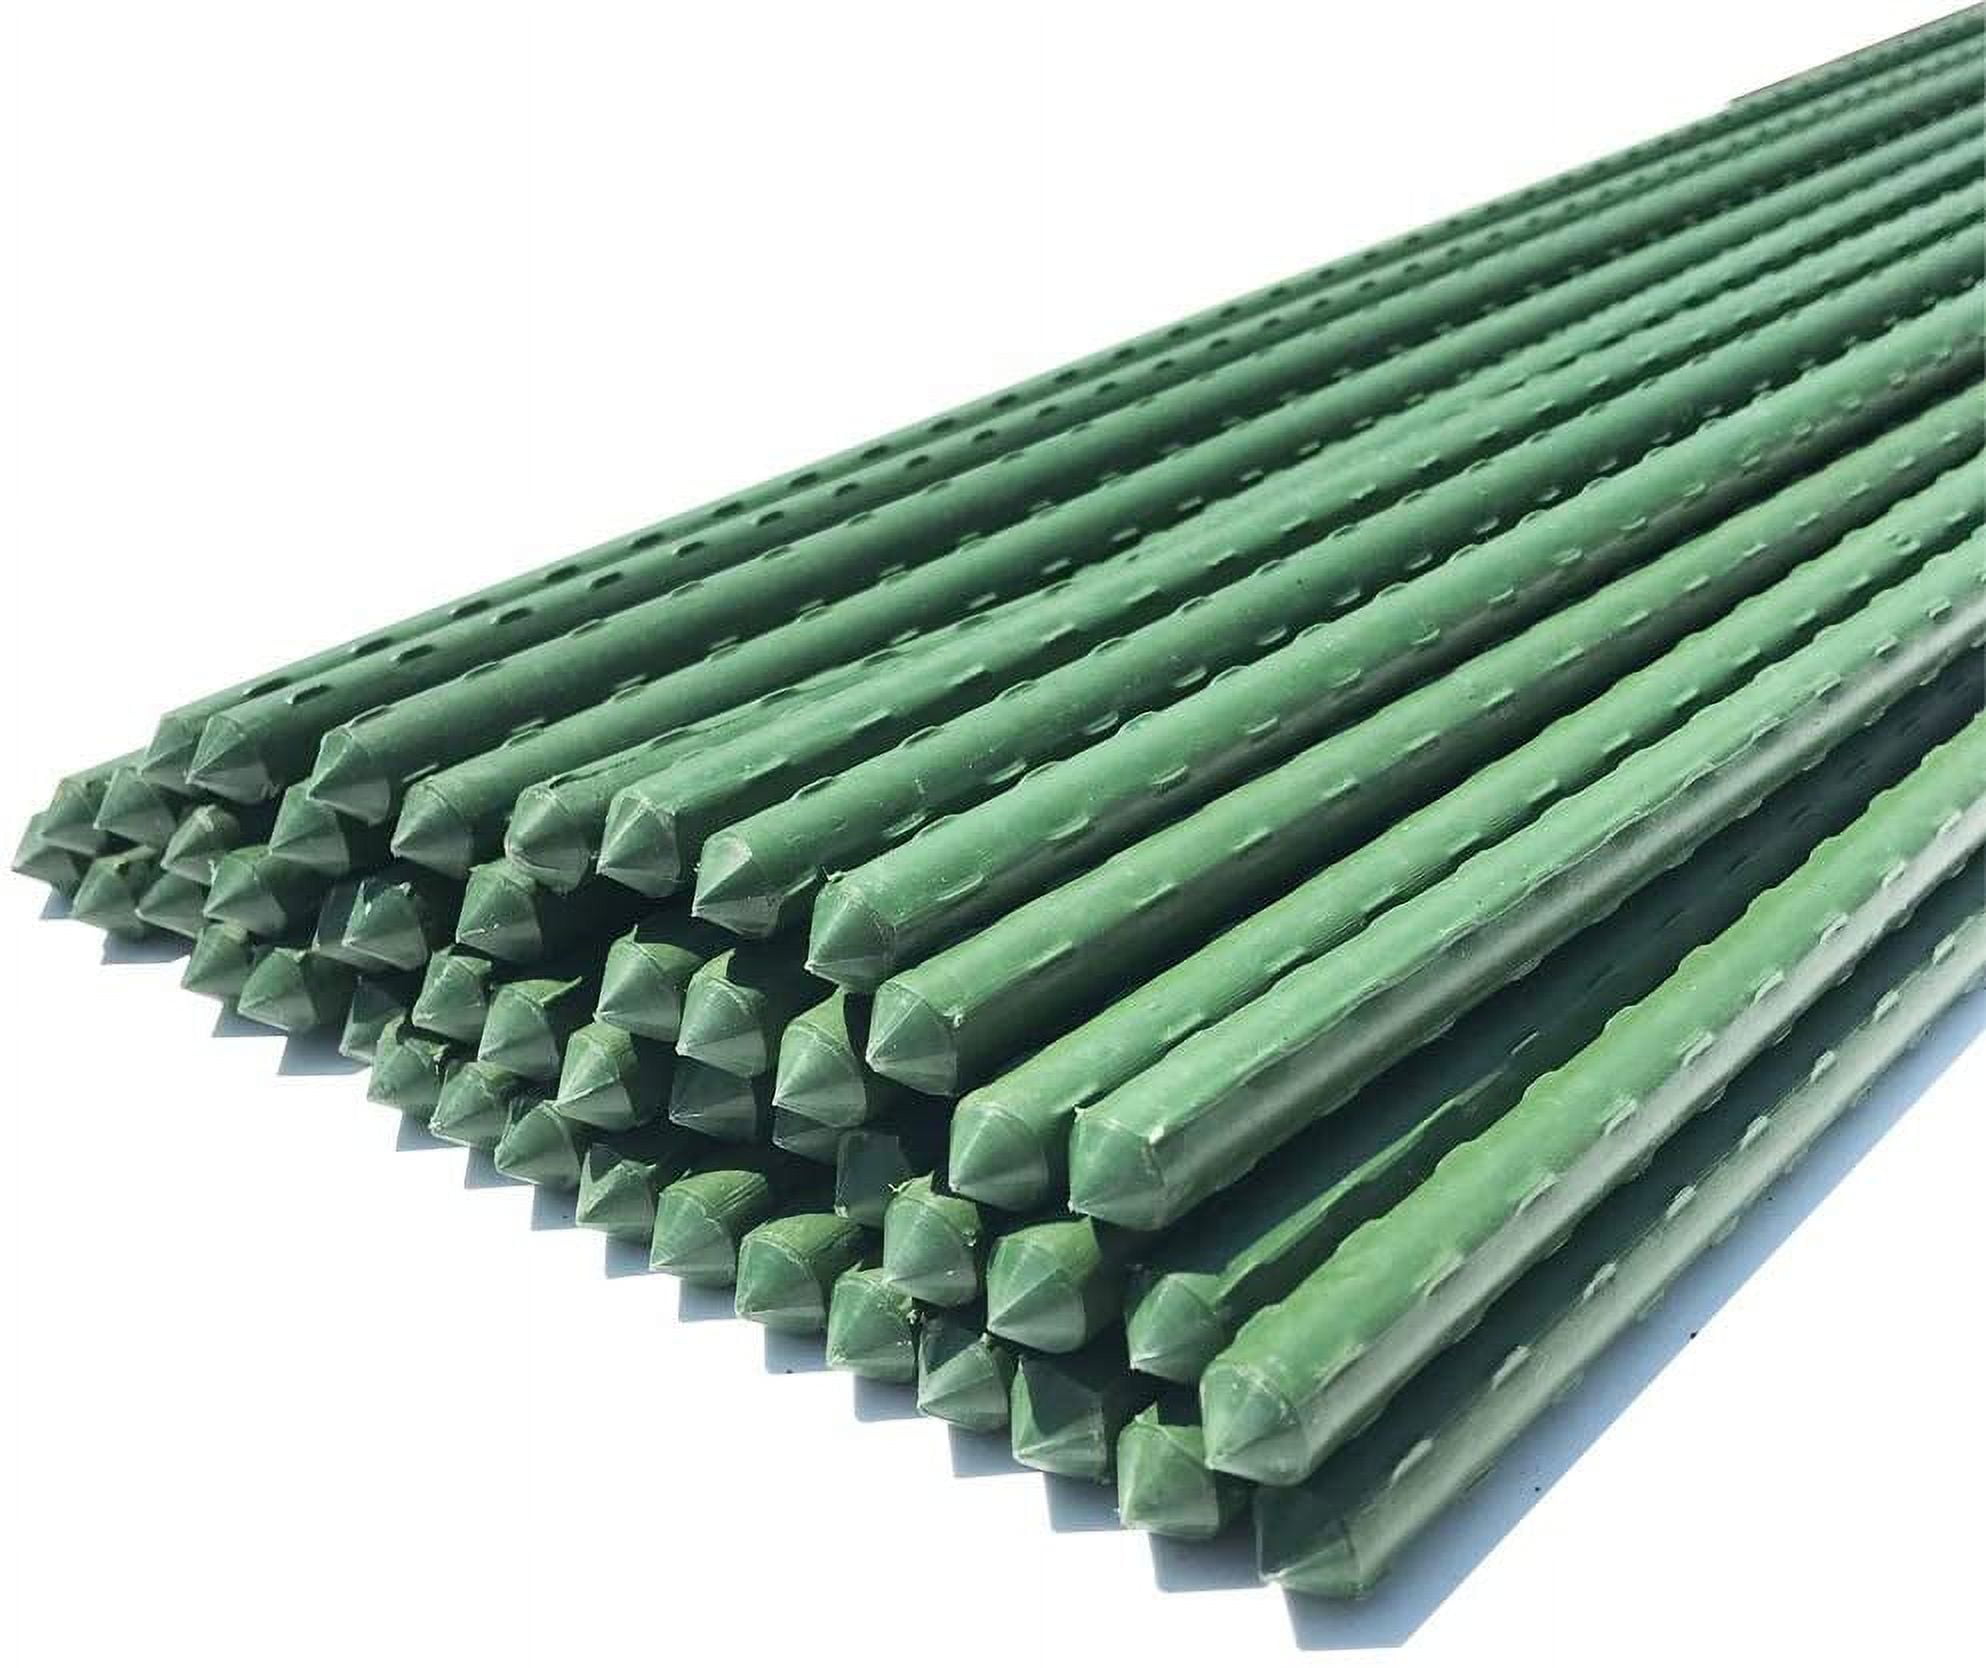 Waenlir Garden Stakes 60 inch 5ft Sturdy Plant Sticks/Support, Tomato Stakes, Pack of 50, Size: 5ft 50Pack, Green